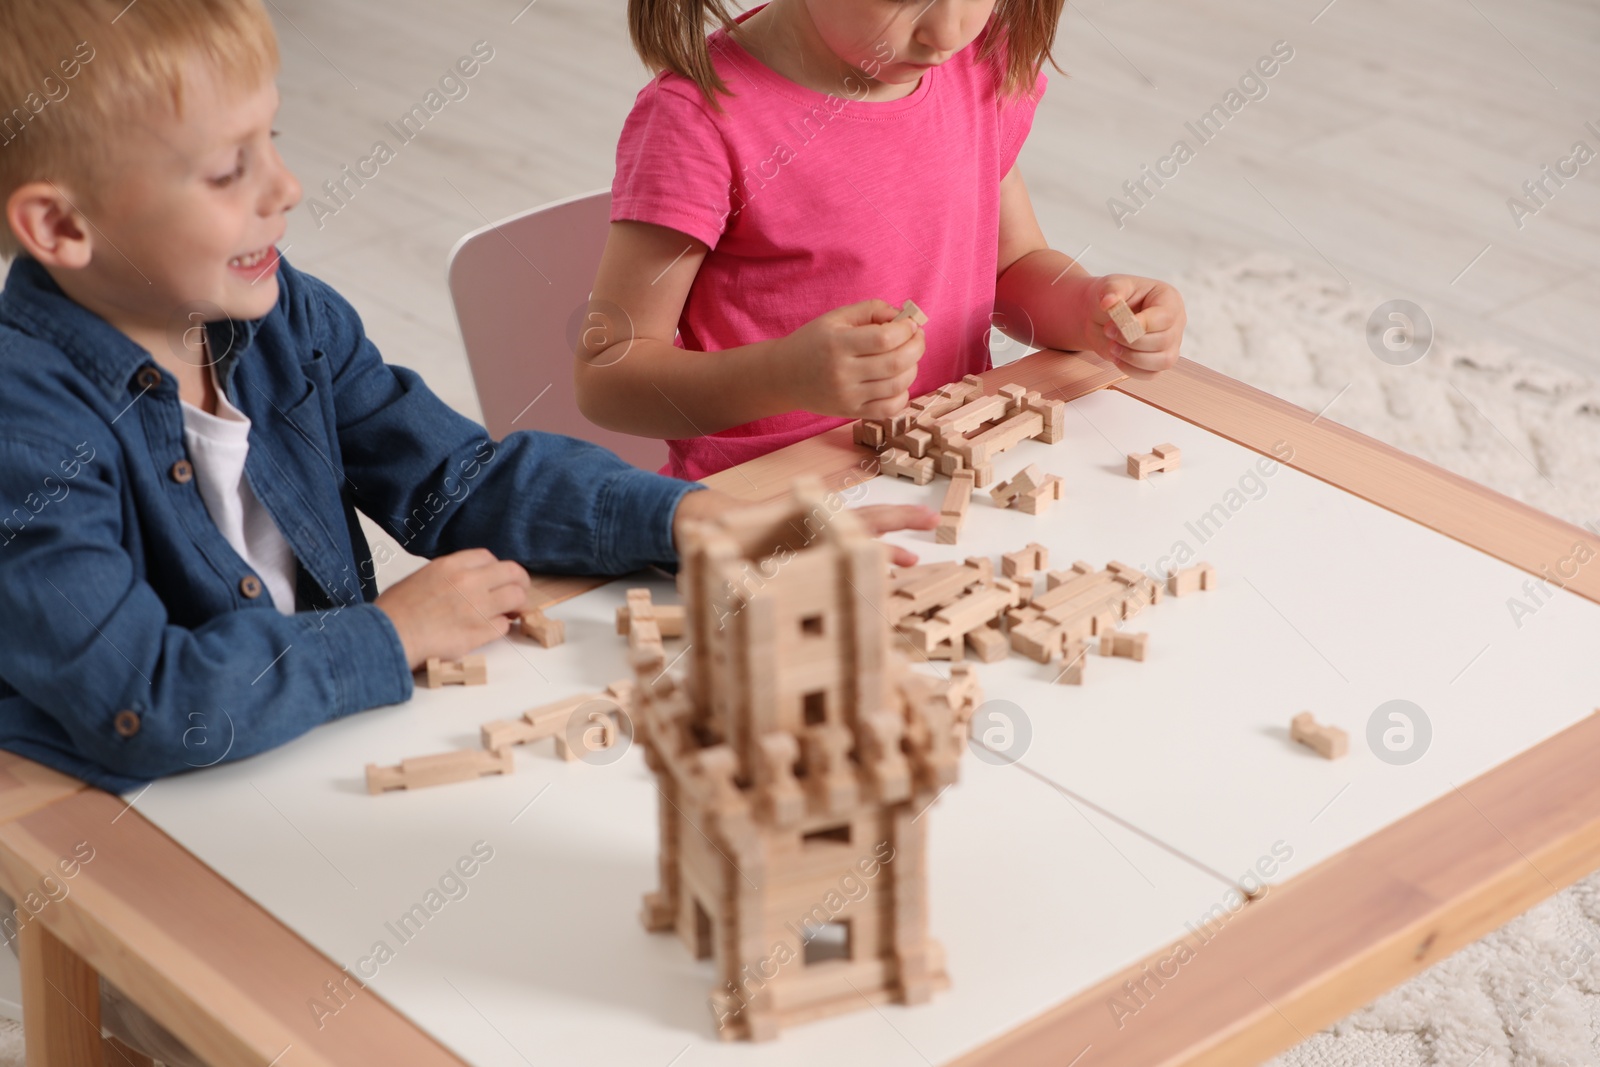 Photo of Little boy and girl playing with wooden tower at table indoors, closeup. Children's toy